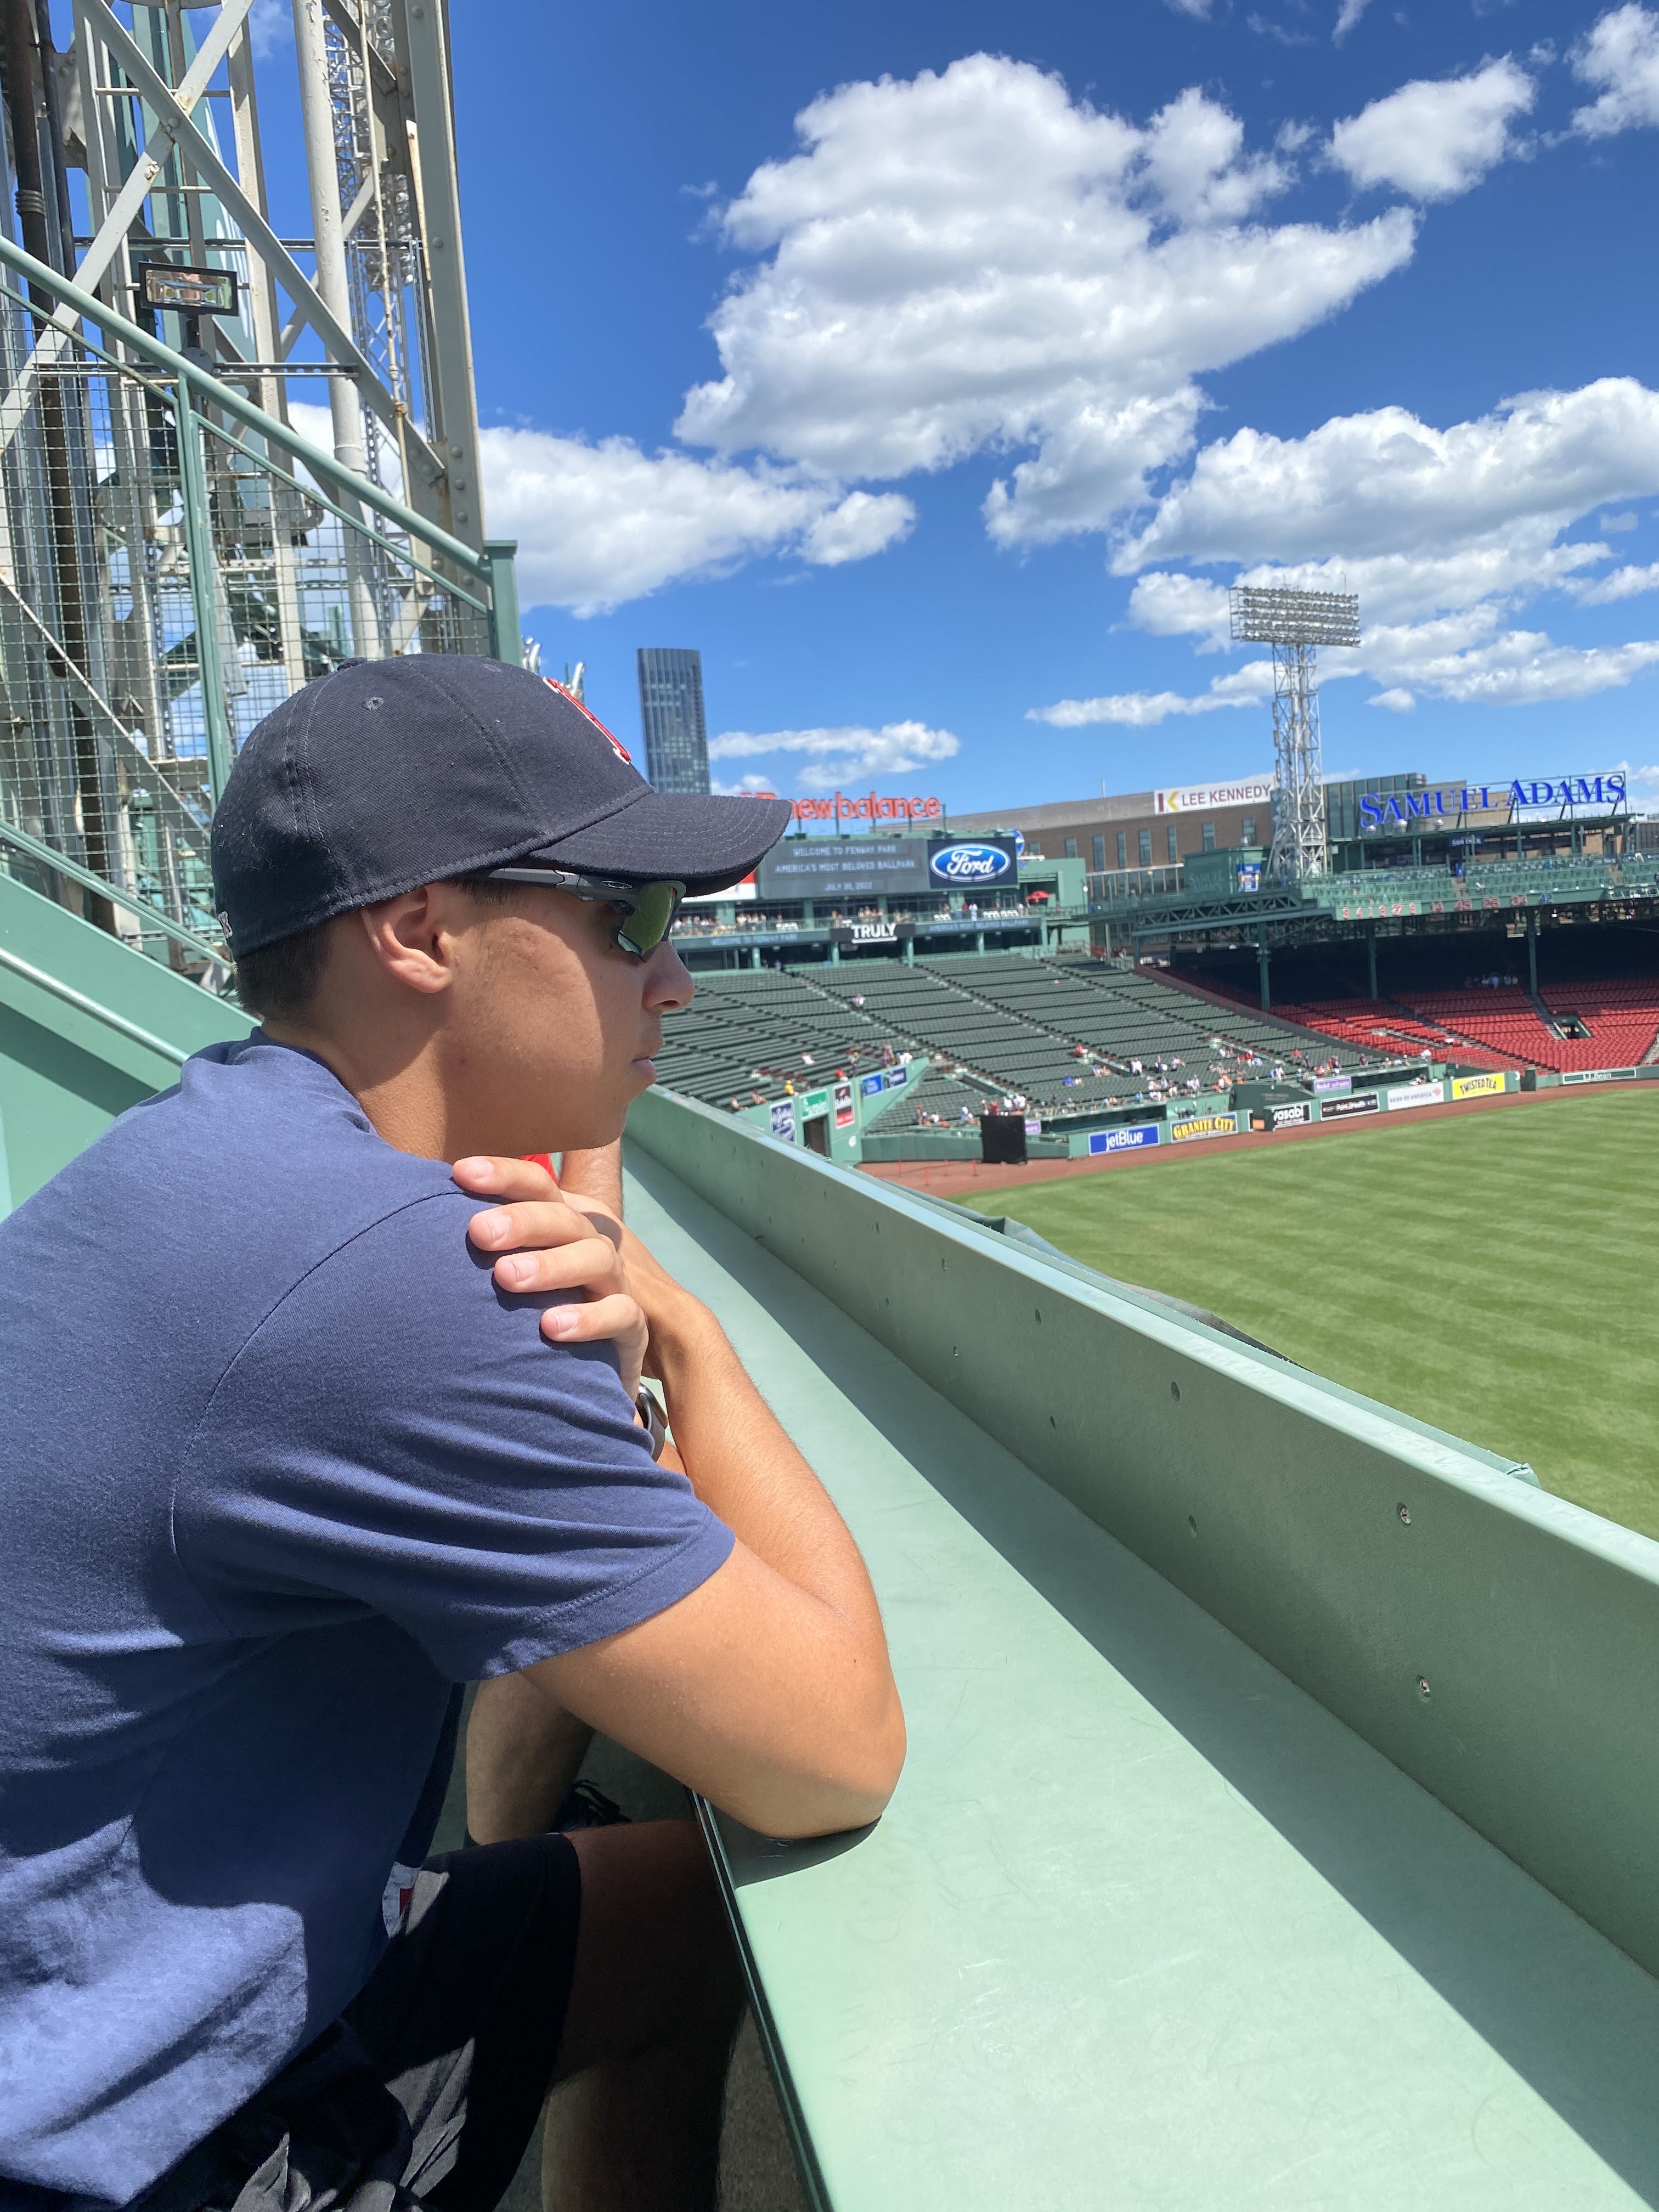 Evan and Lauren's Cool Blog: Family Fun at a Red Sox Game